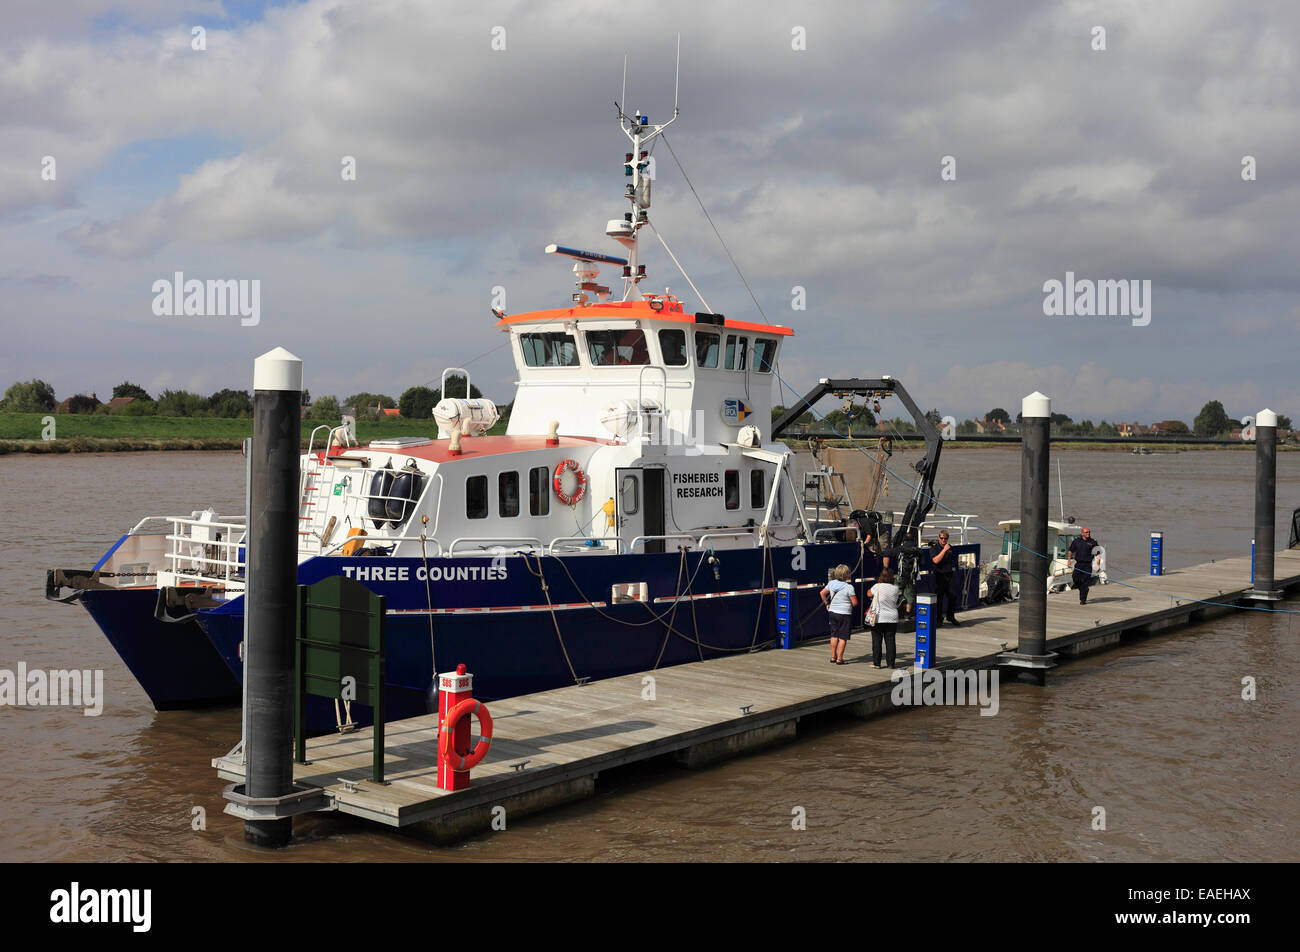 The Three Counties, fisheries research and support vessel at King's Lynn, Norfolk. Stock Photo